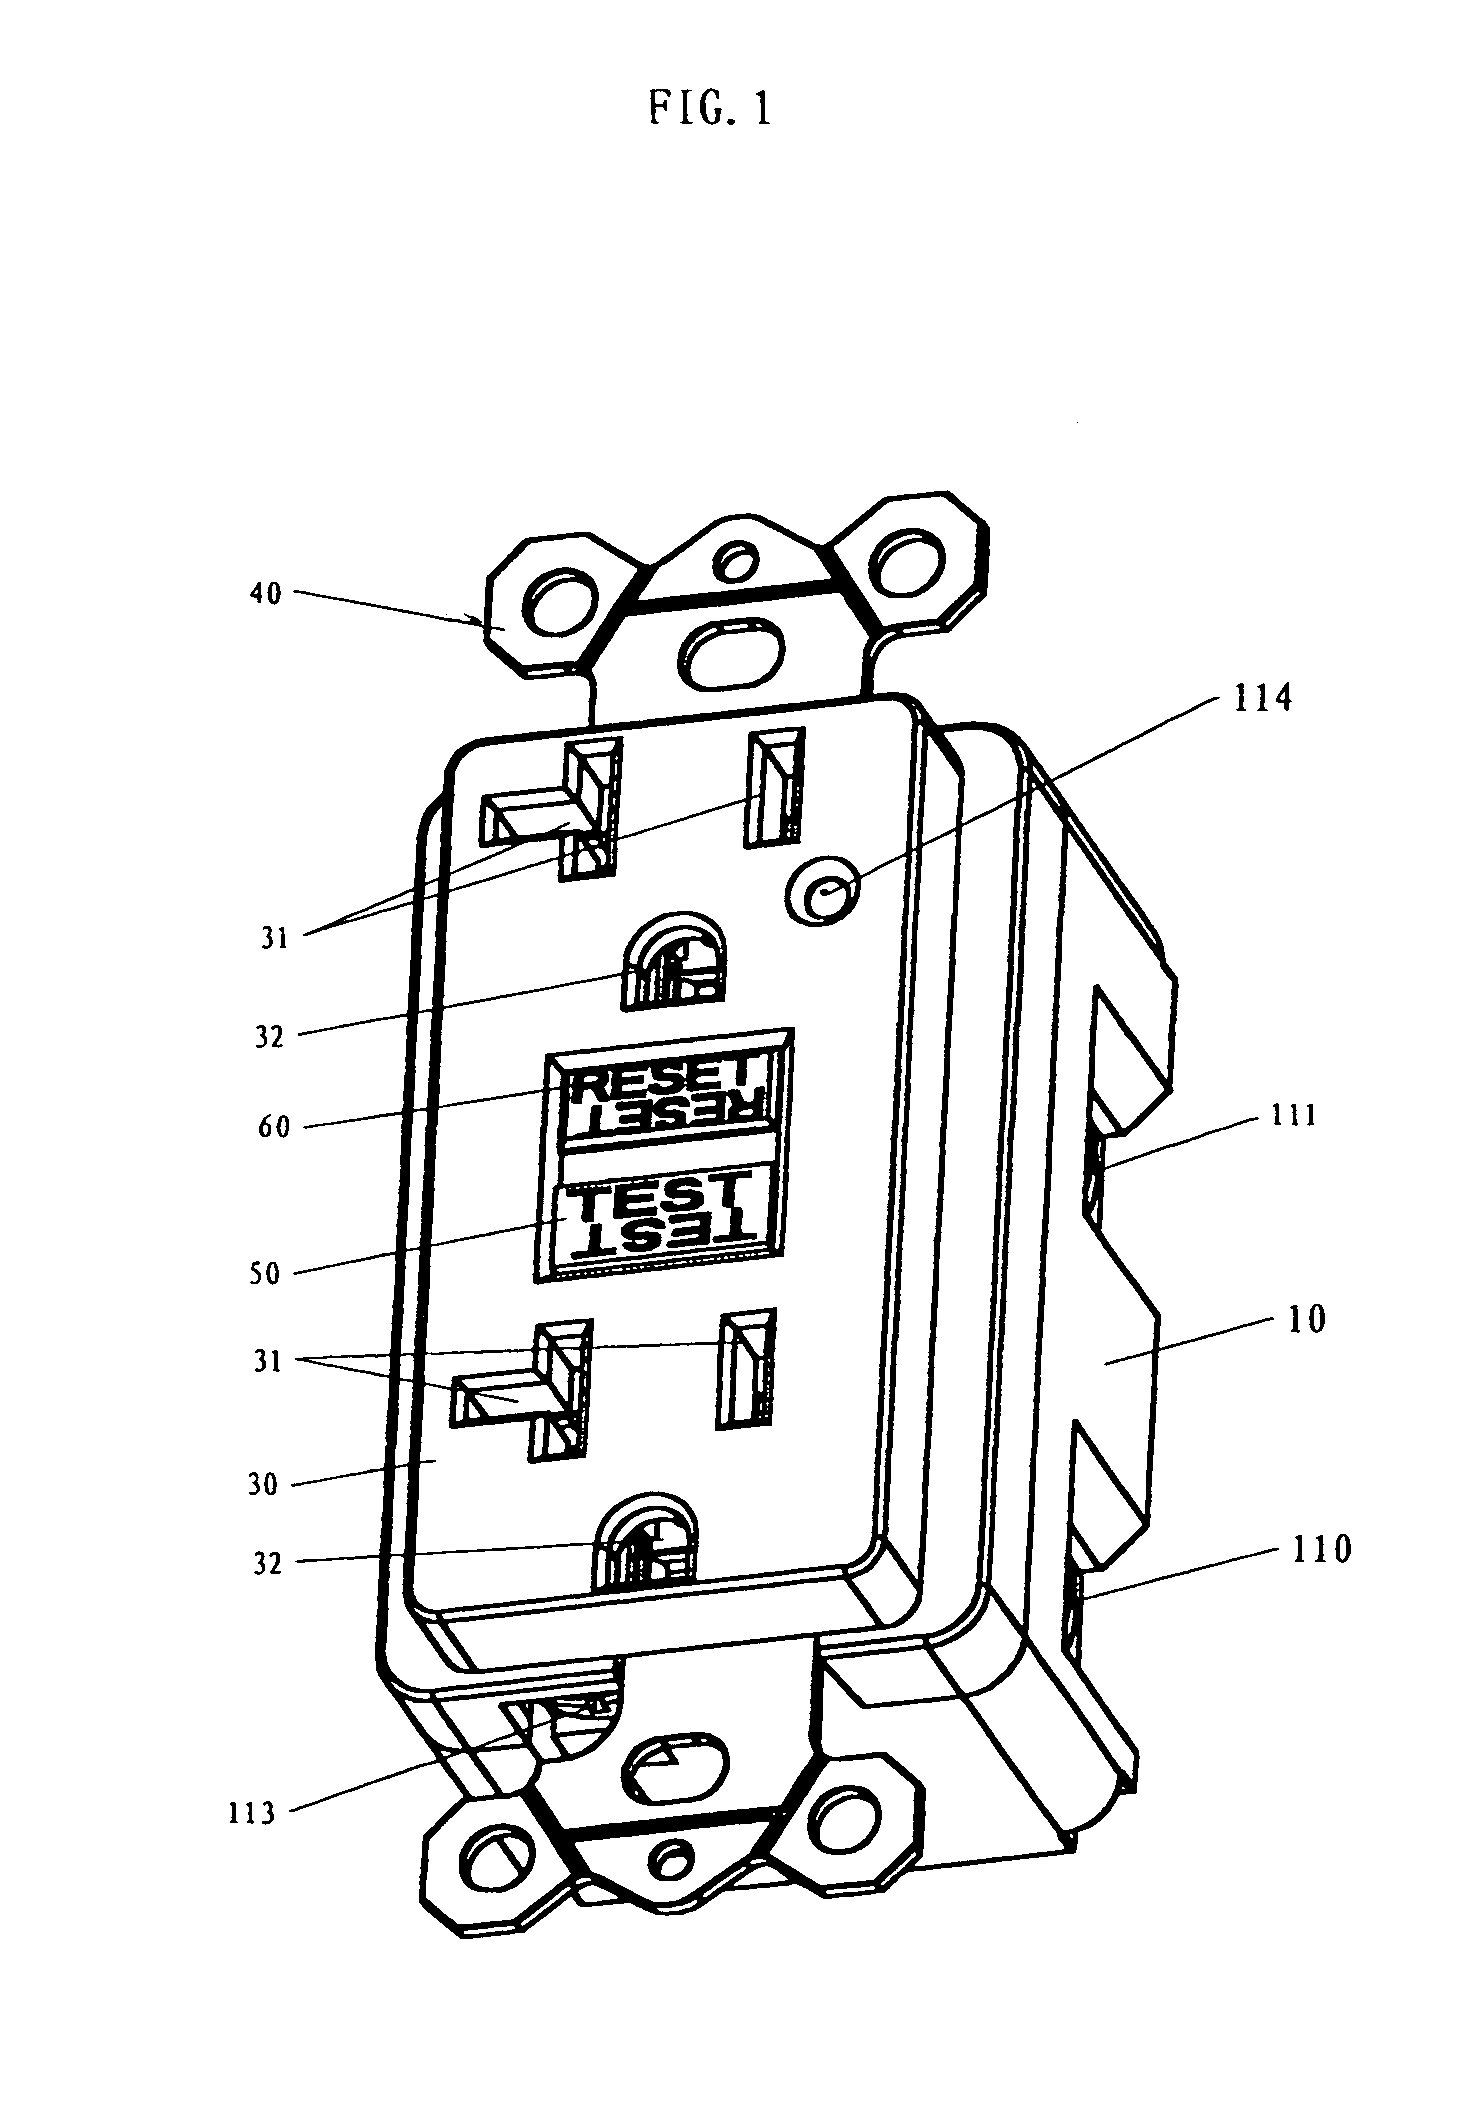 Ground fault circuit interrupter with reverse wiring protection